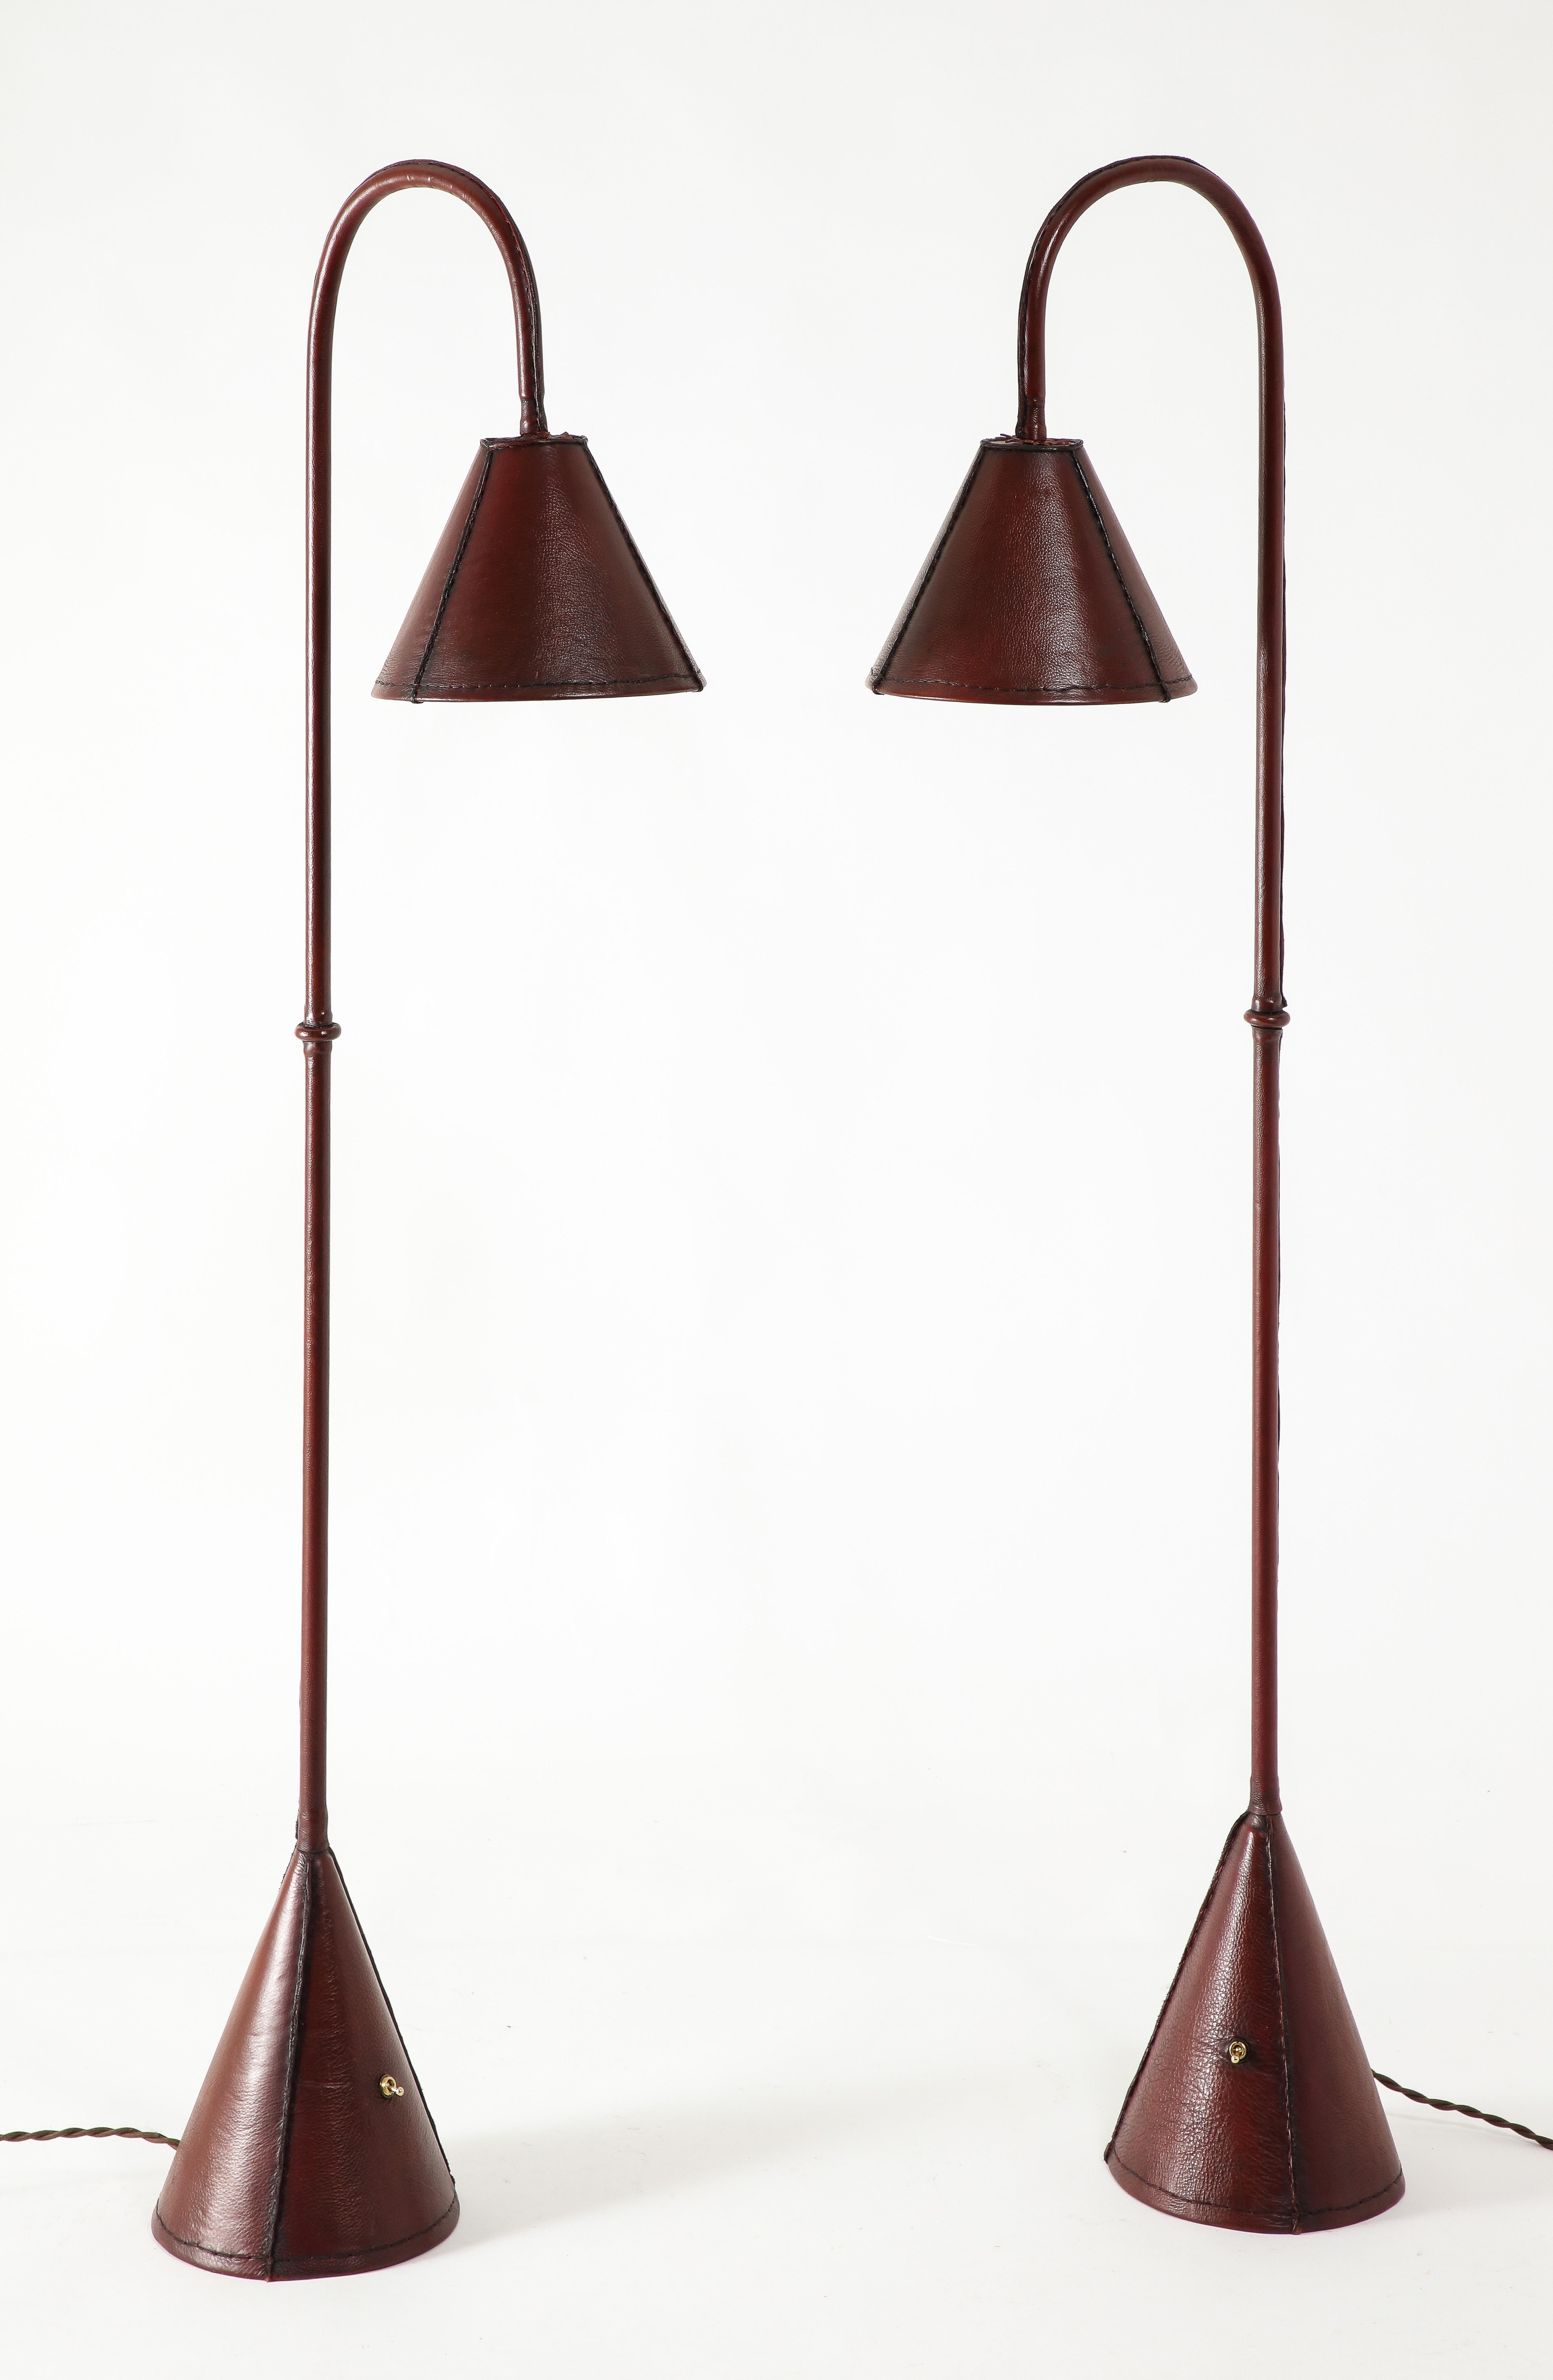 Valenti / Adnet Reading Floor Lamps, France 1950's For Sale 2